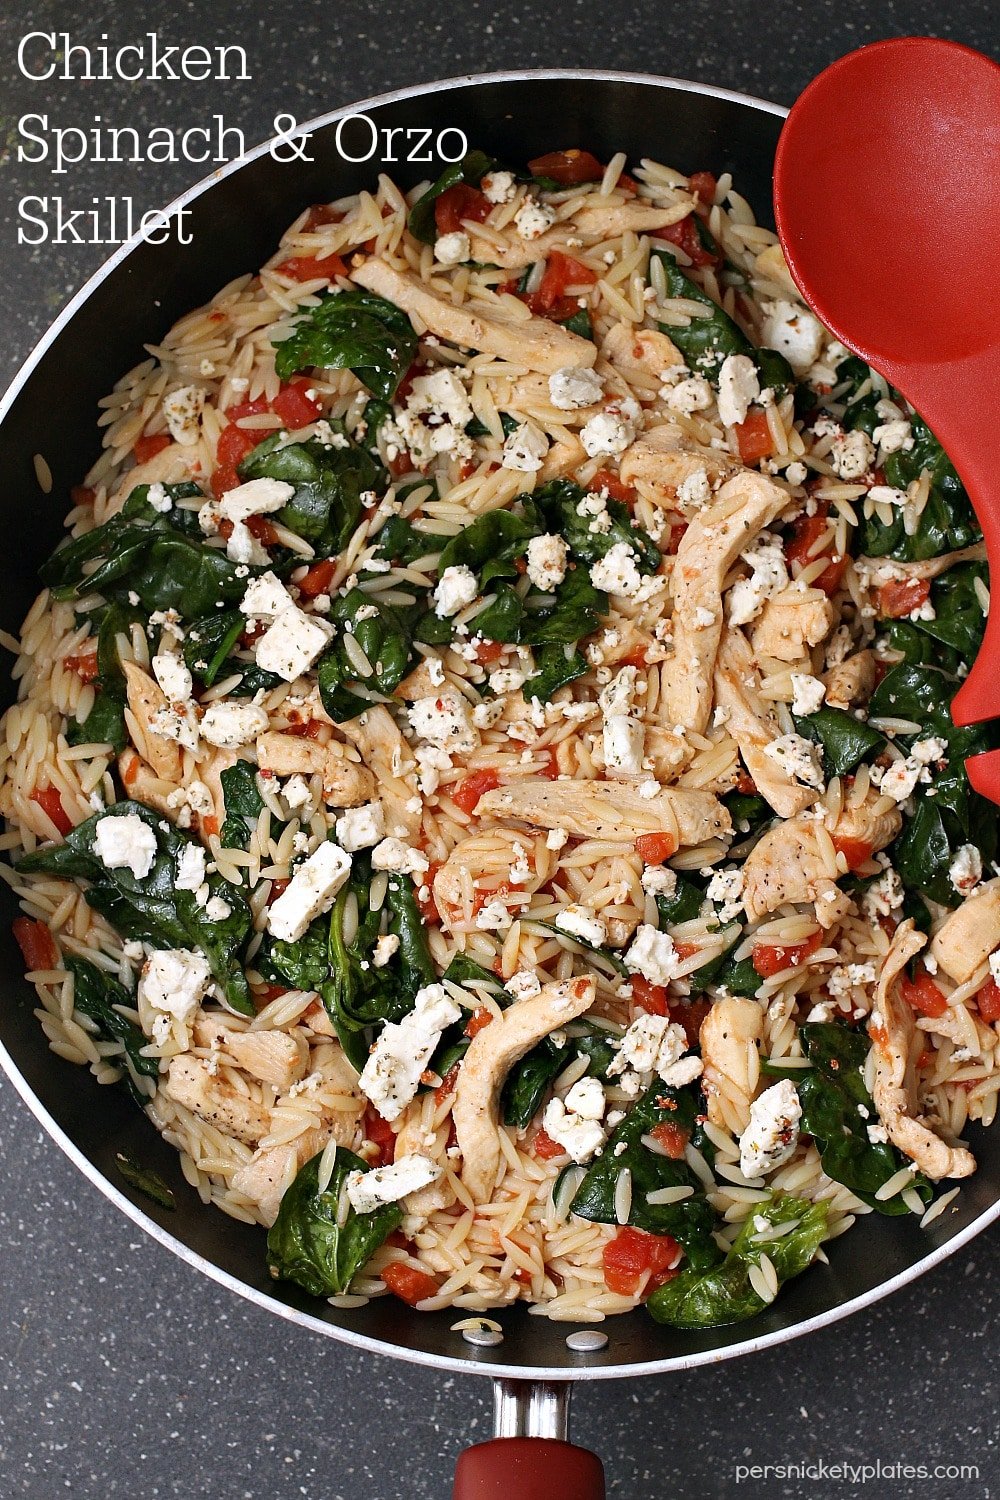 Chicken Spinach & Orzo Skillet | Persnickety Plates